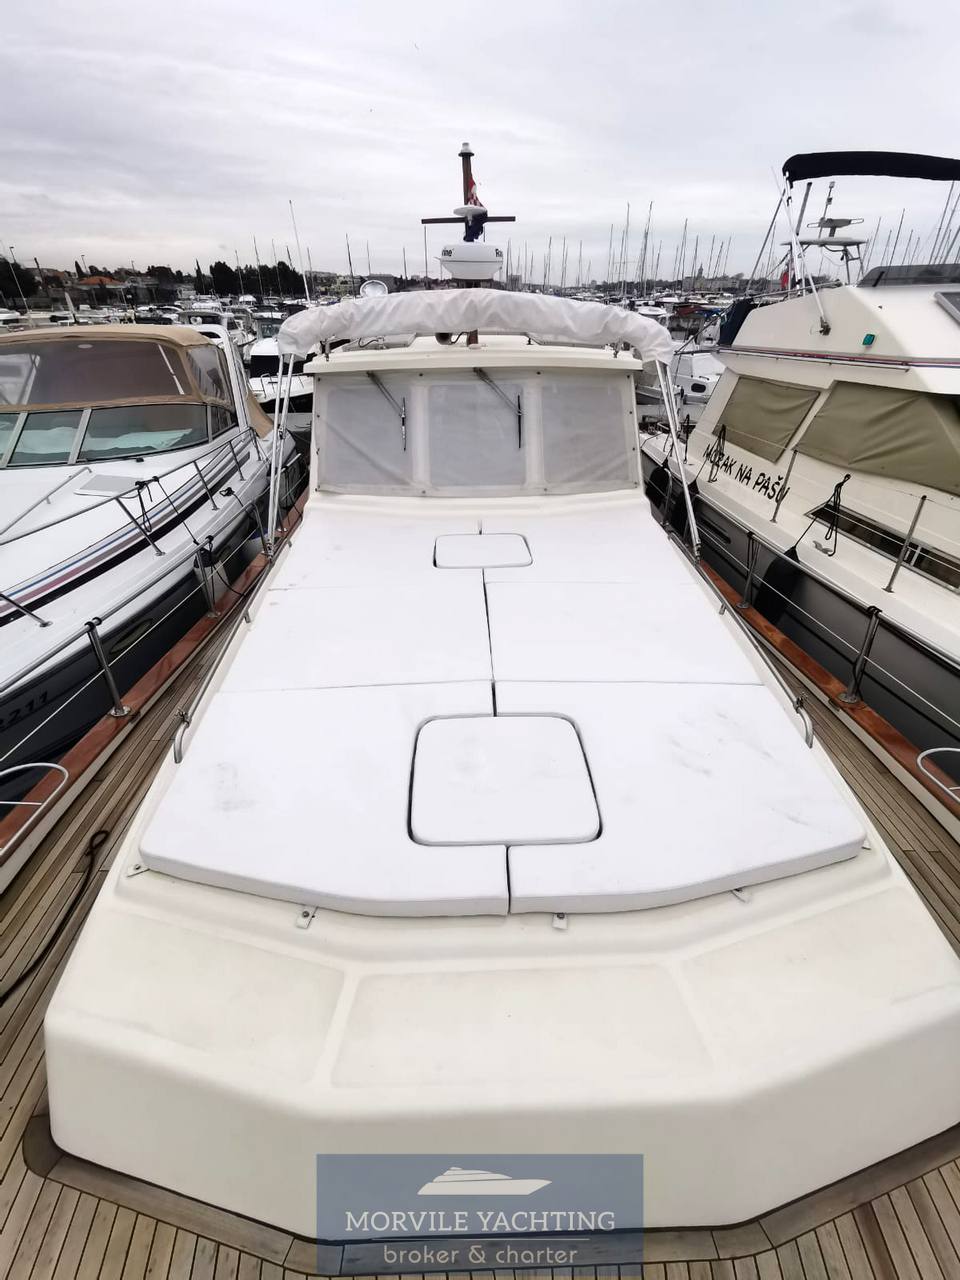 Menorquin Yacht 120 Motor boat used for sale